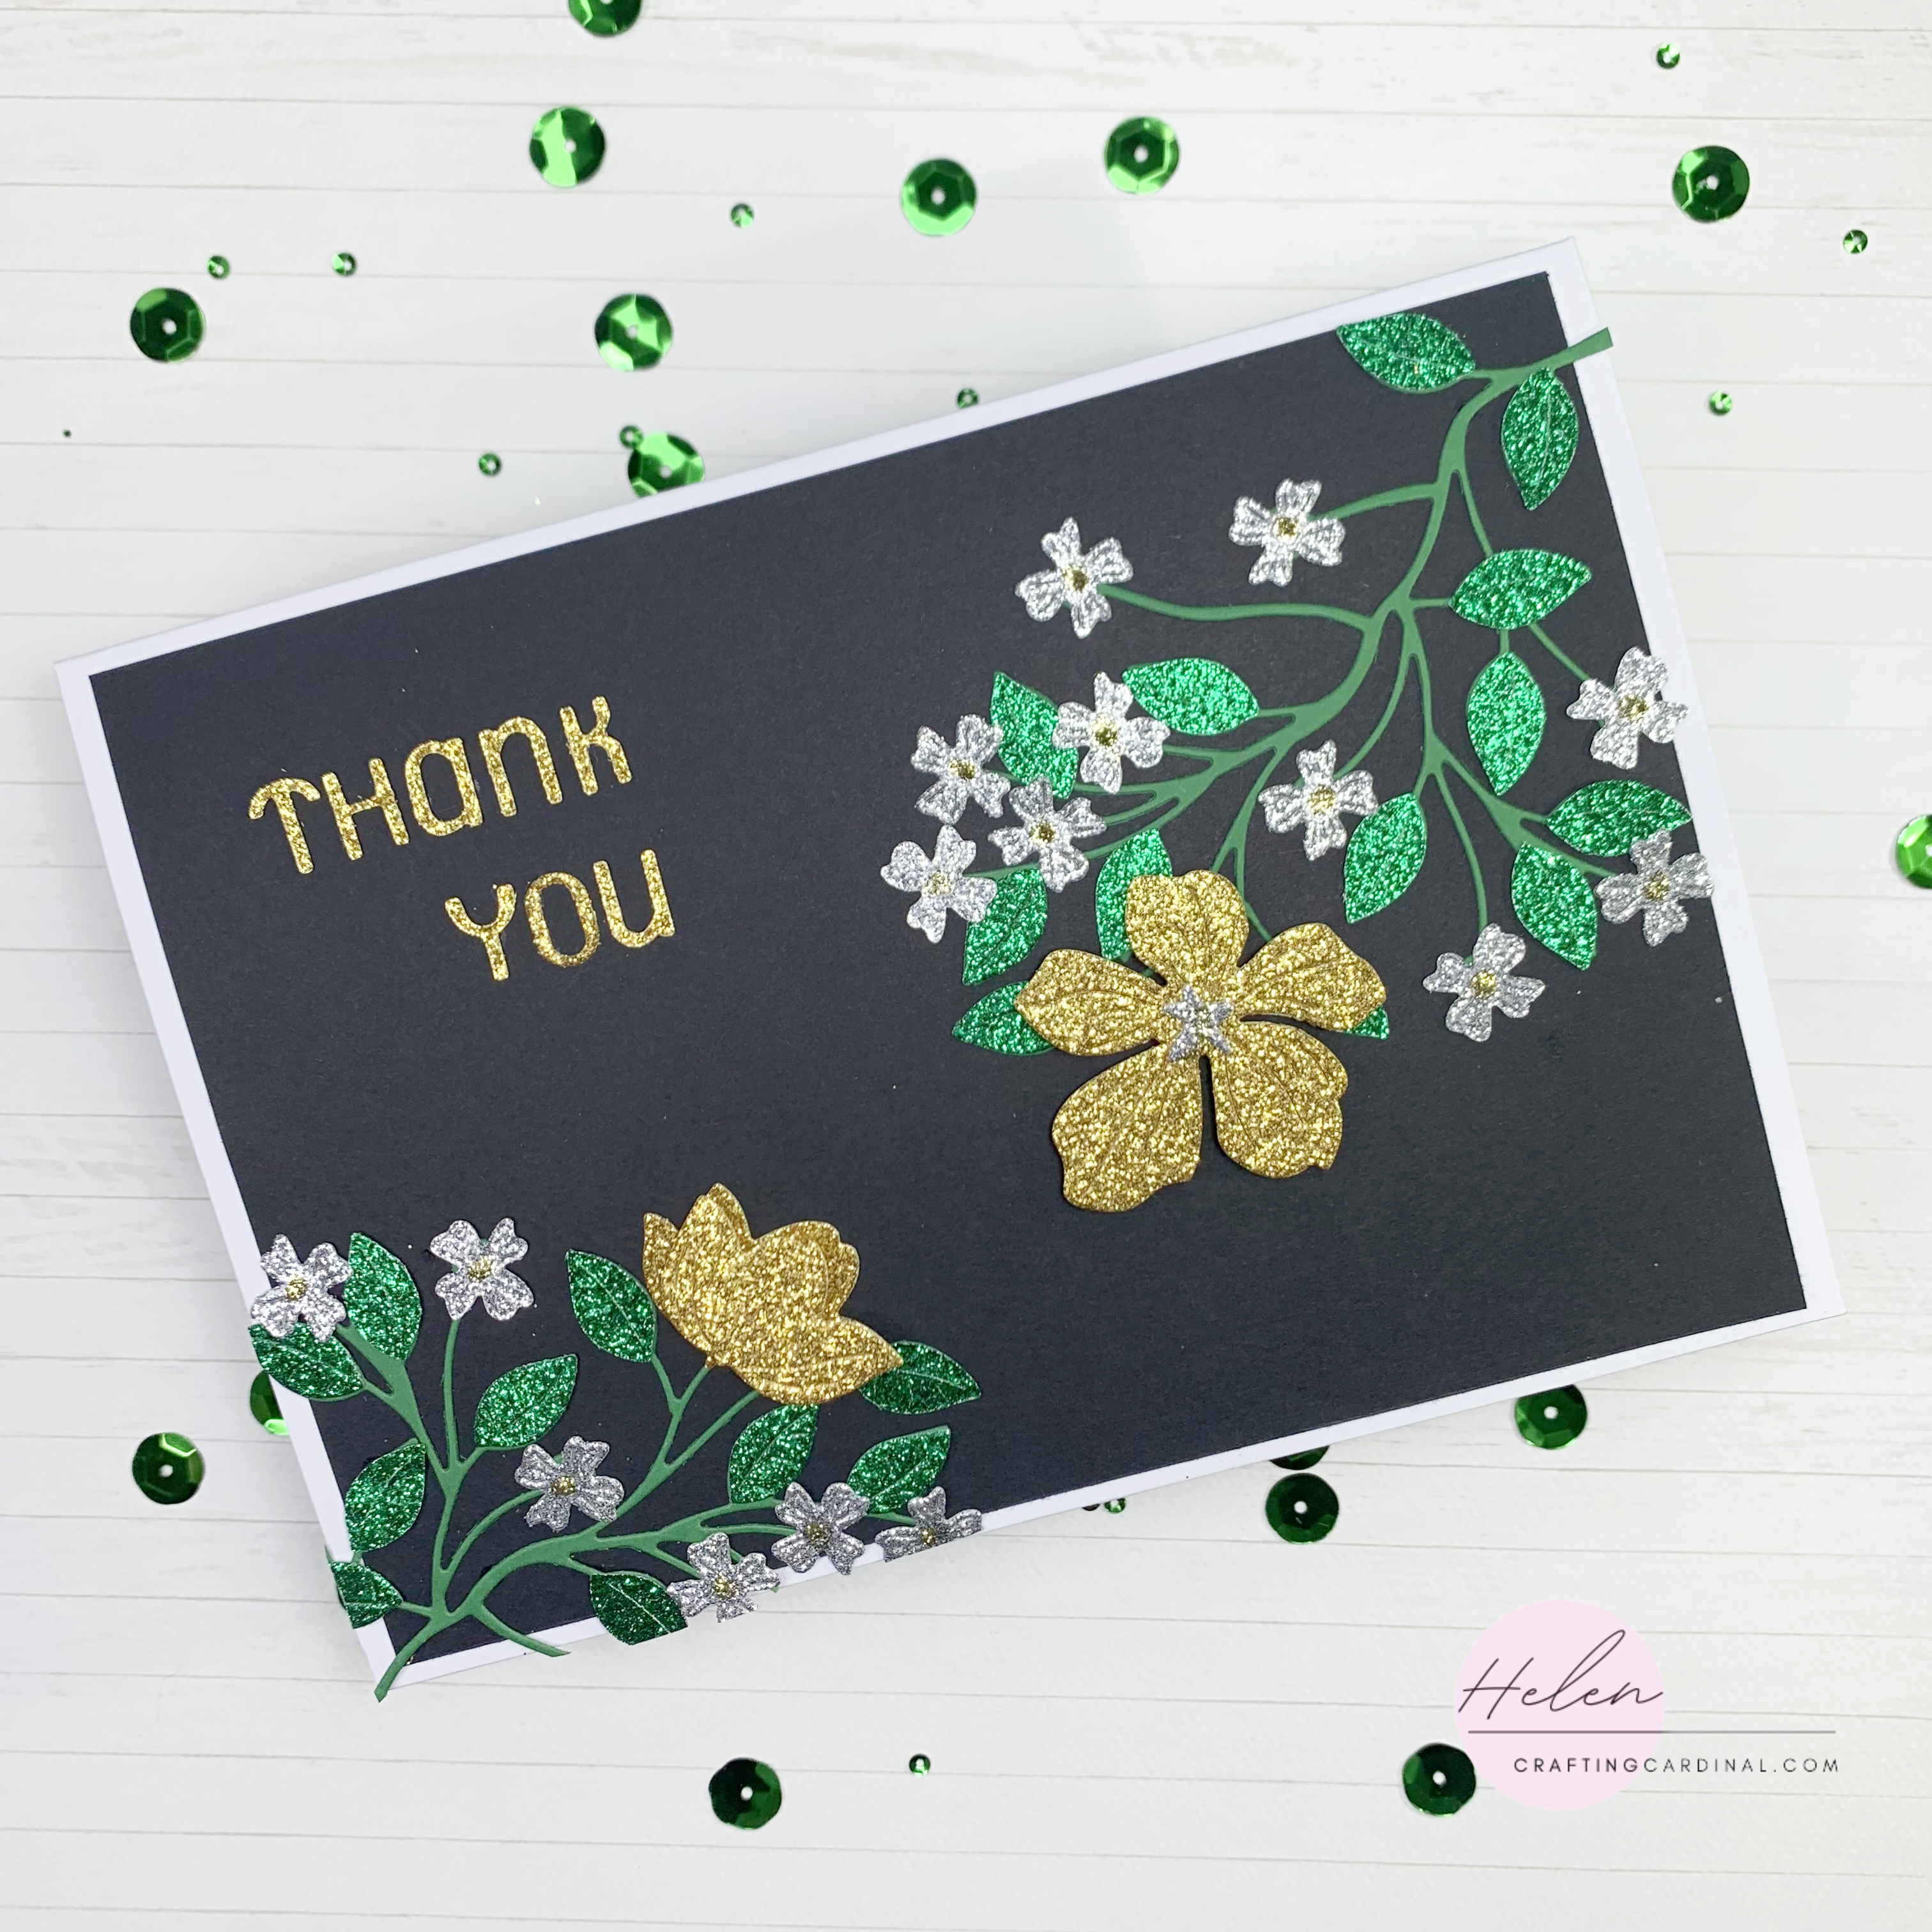 thank you card watermarked